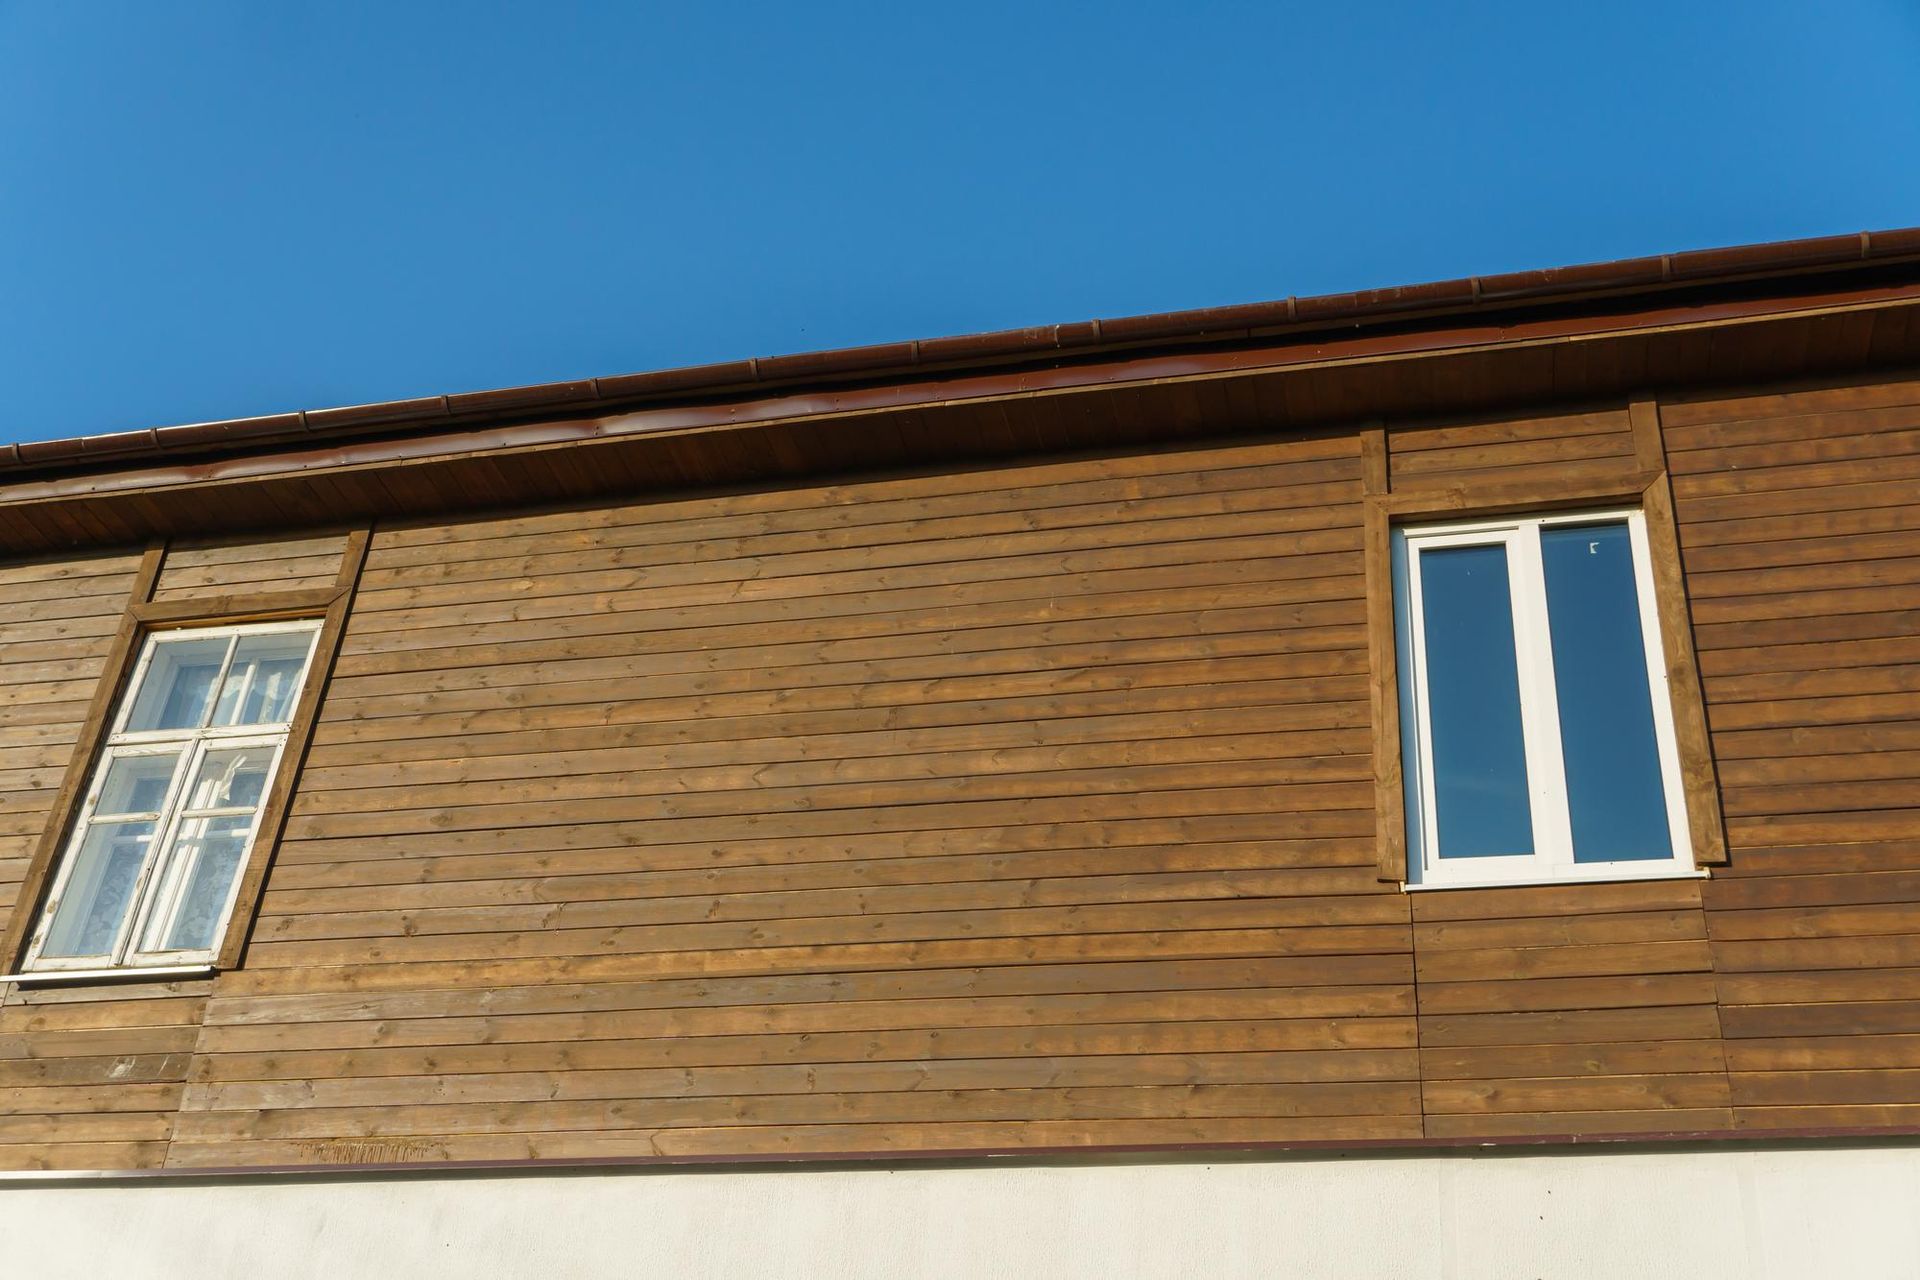 a wooden building with two windows and a blue sky in the background